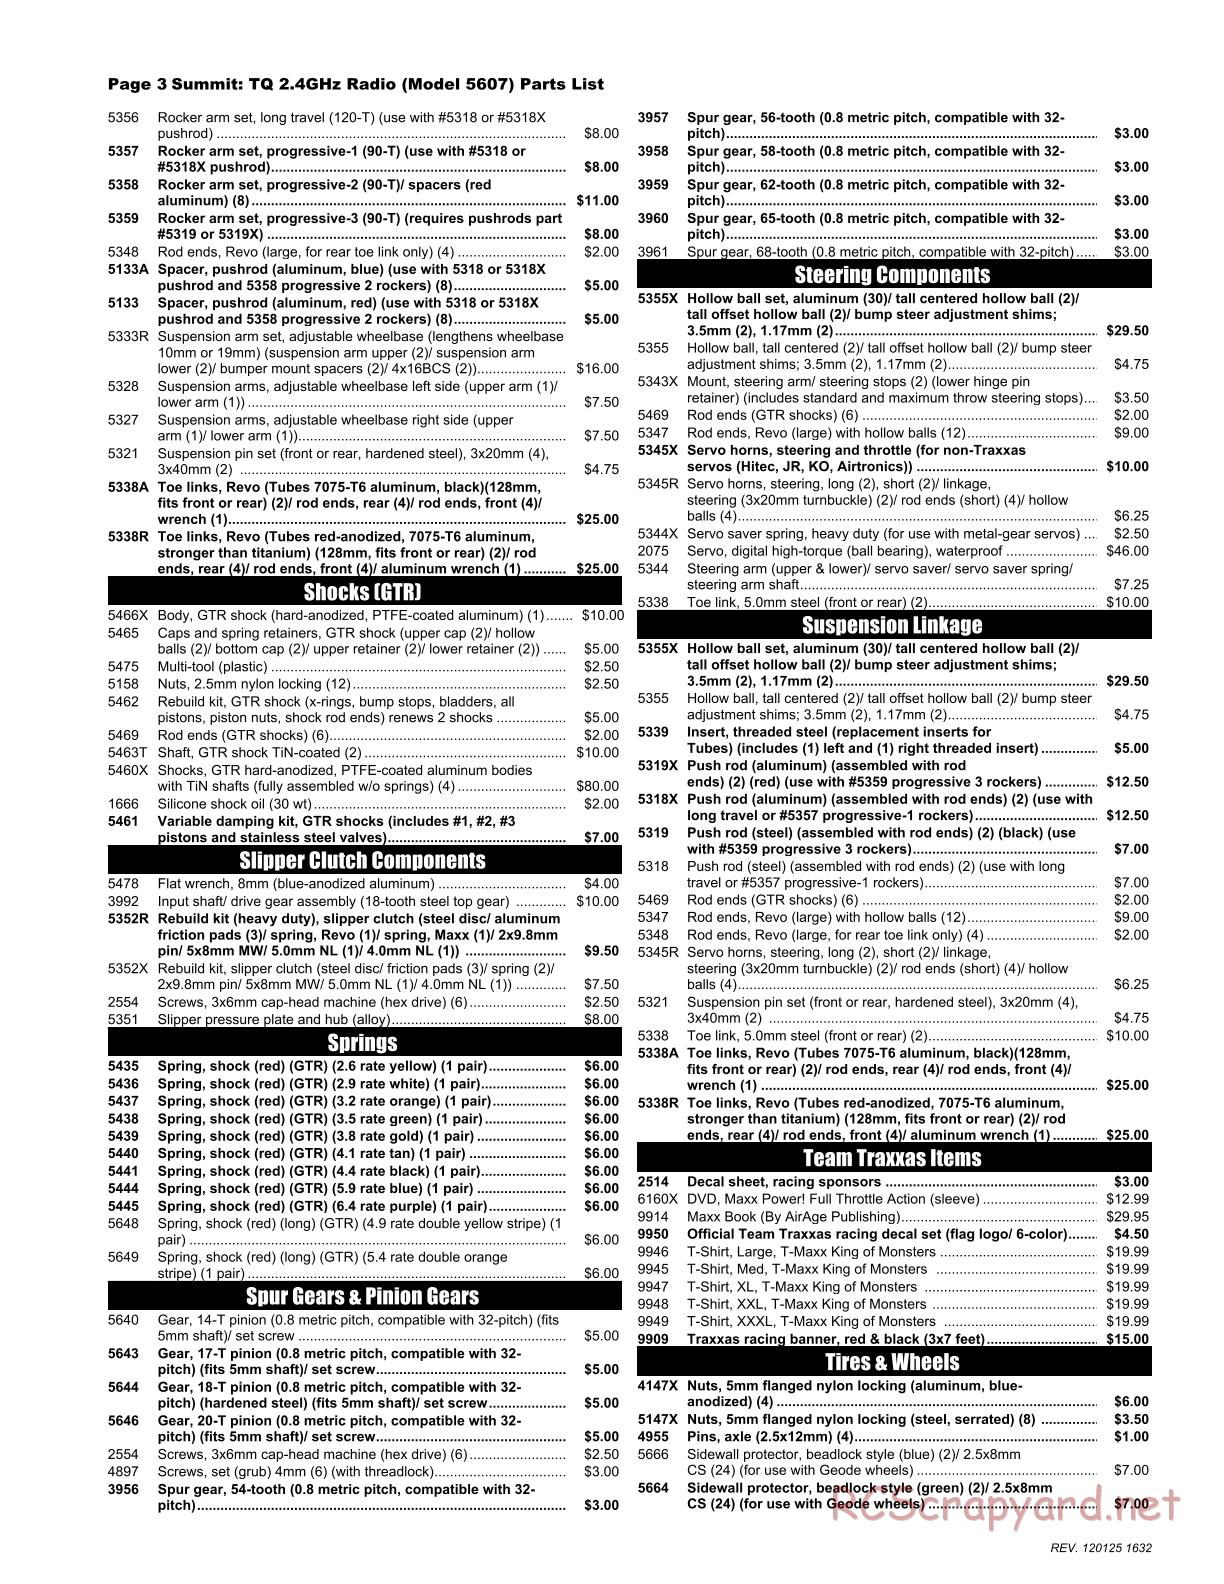 Traxxas - Summit - Parts List - Page 3